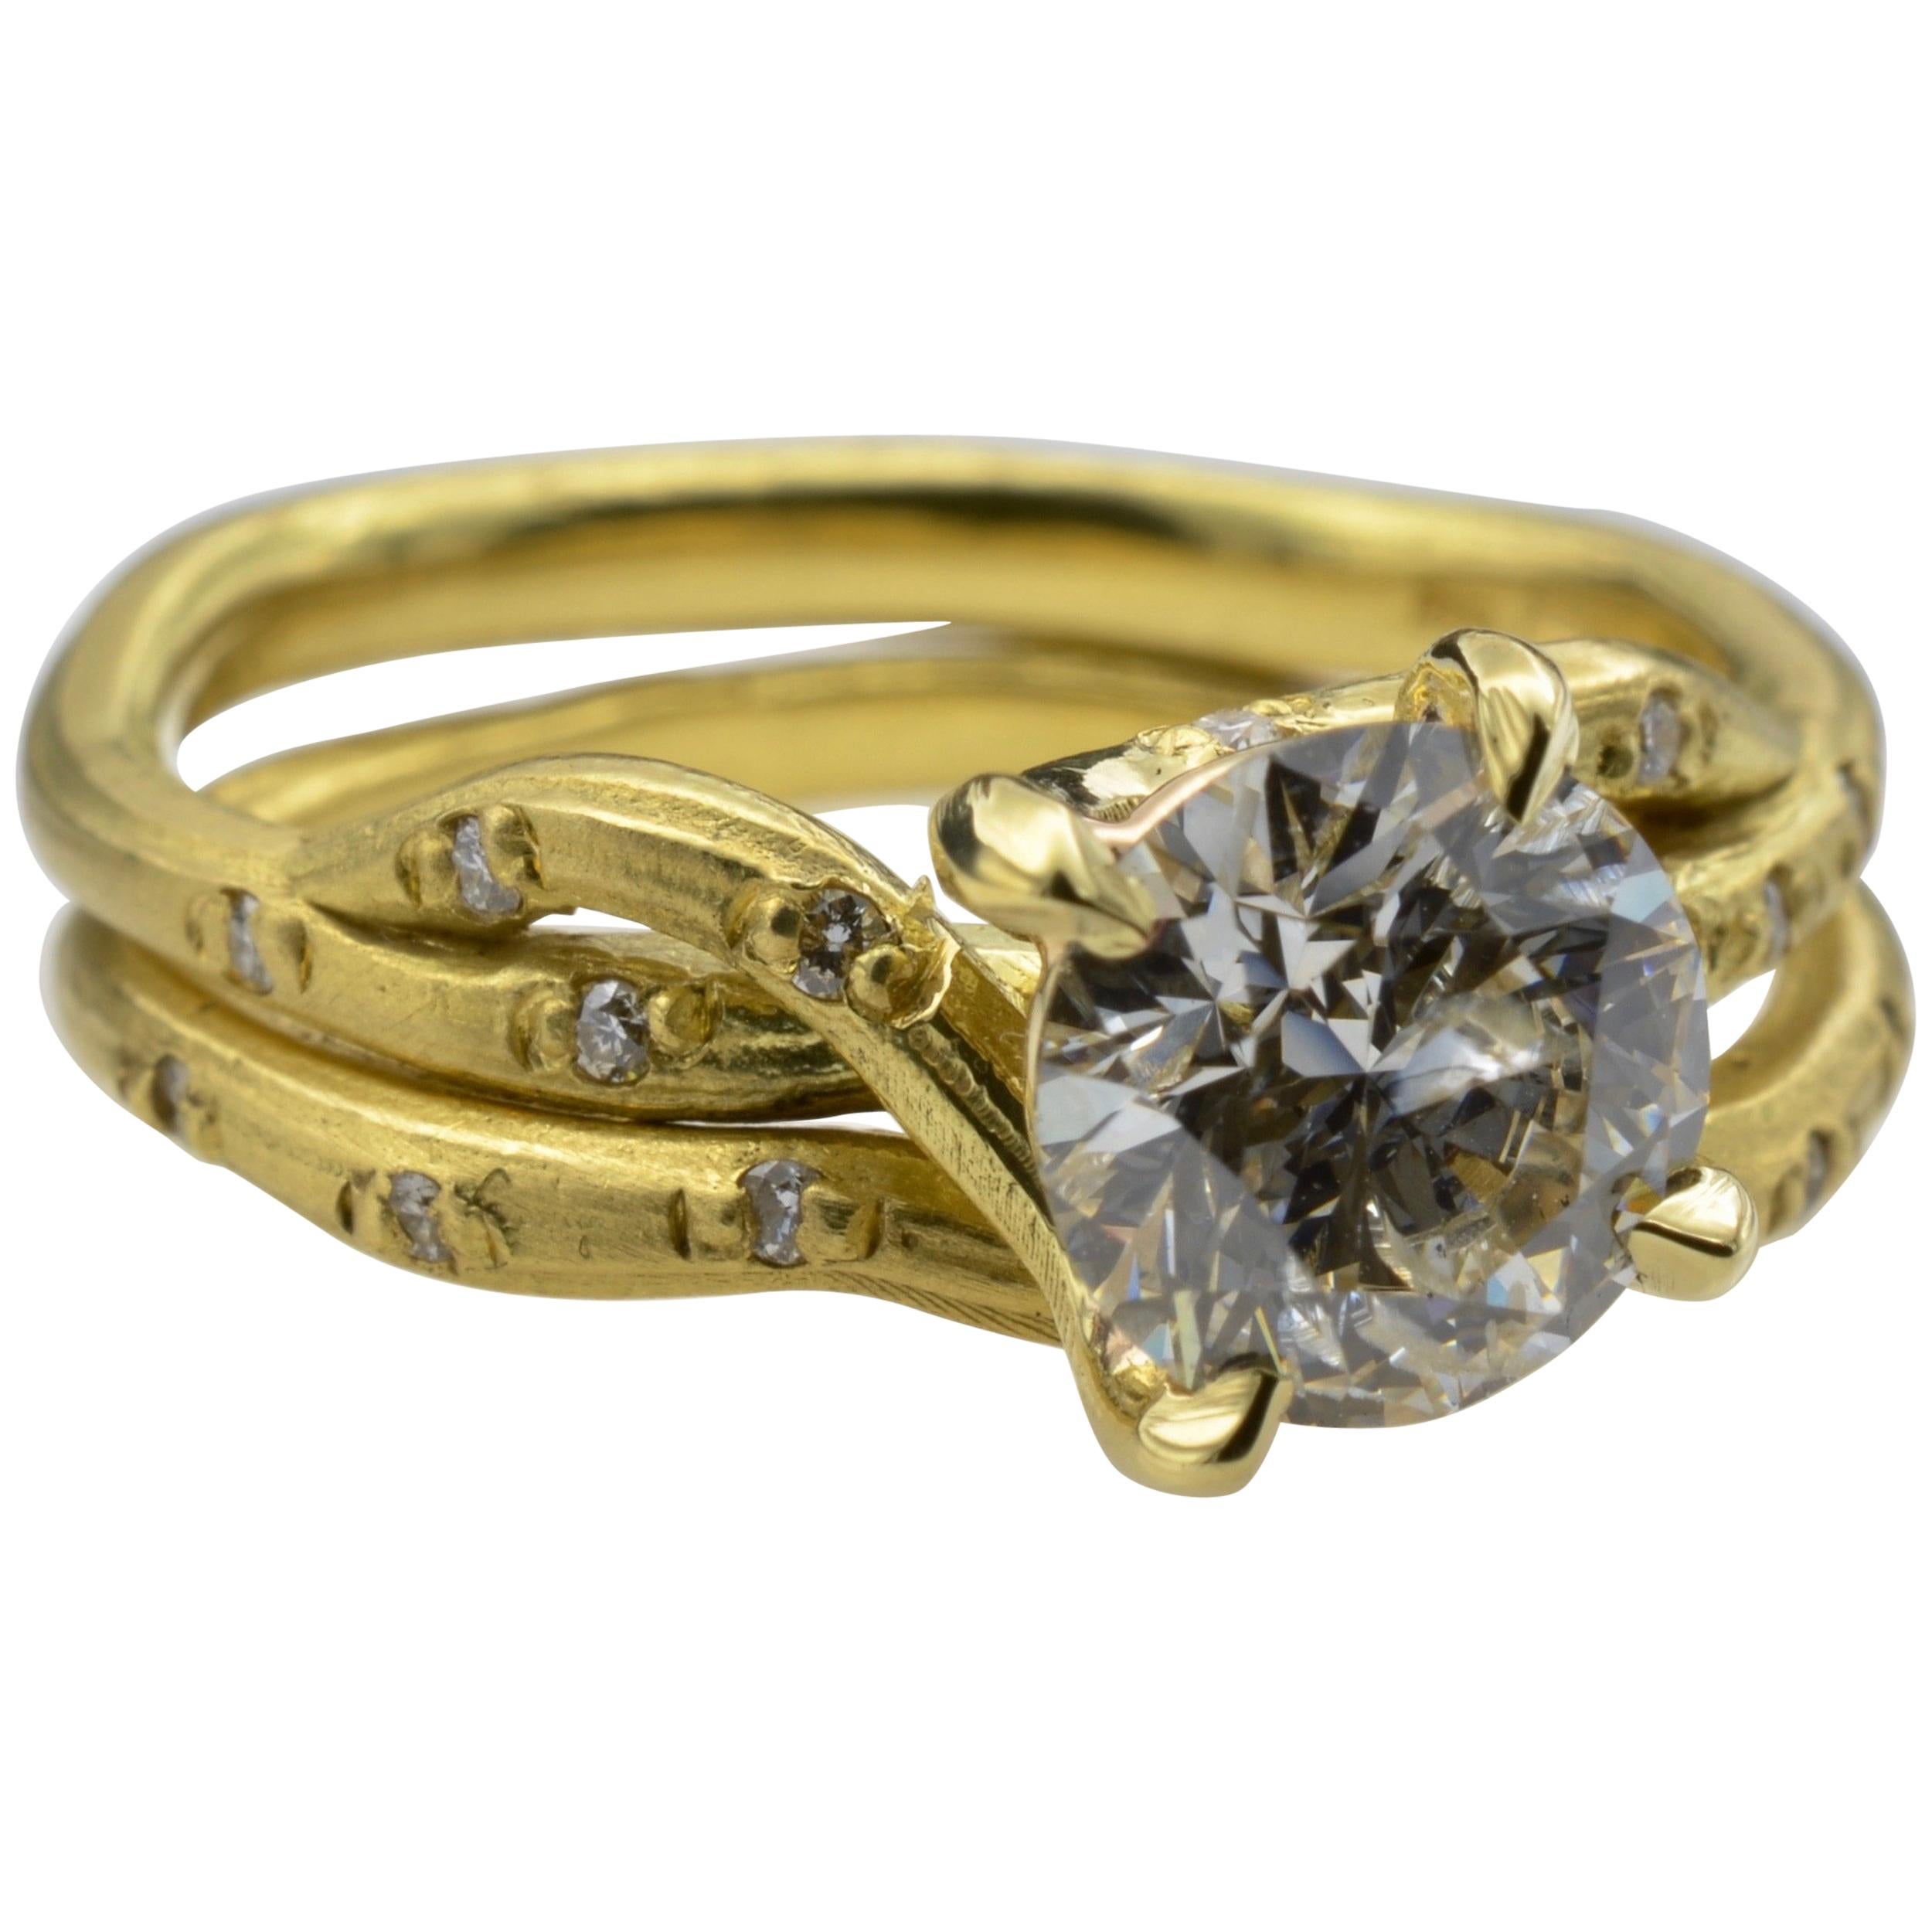 Alternative Engagement Ring 1.18 ct Diamond Old Mine Cut in 18K yellow gold